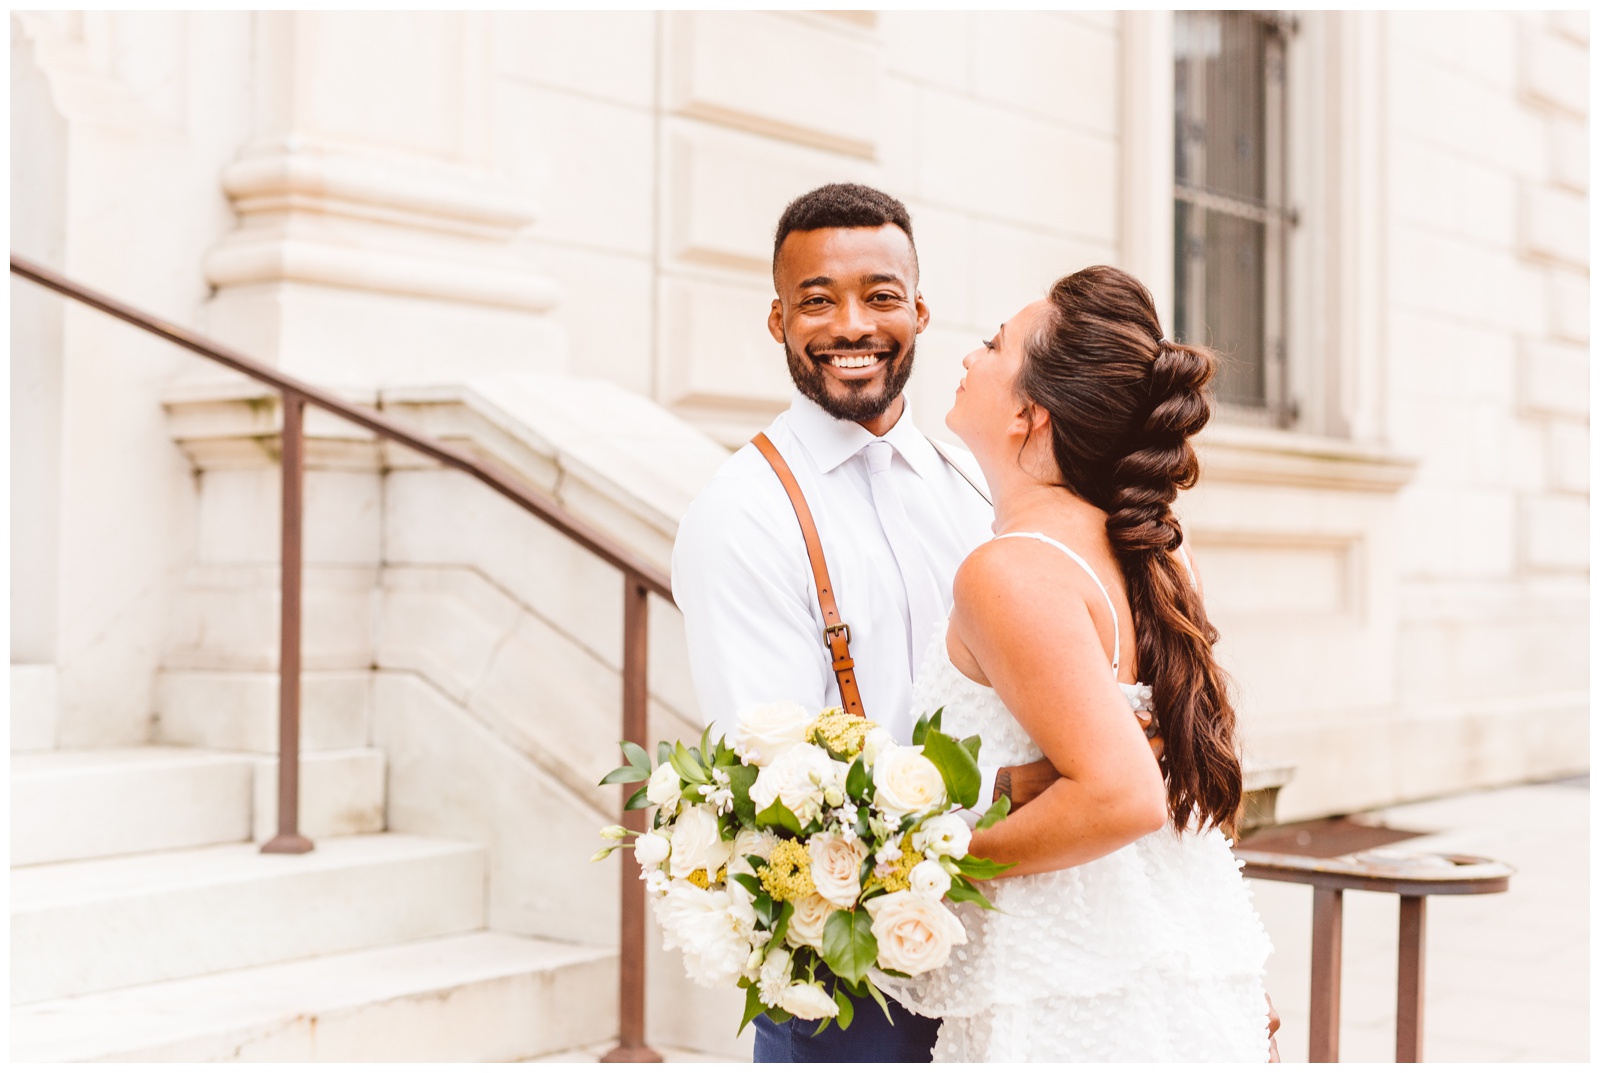 Romantic & Bold Italian Elopement Wedding Inspiration for the Adventurous Couple - Baltimore, Maryland - Brooke Michelle Photography